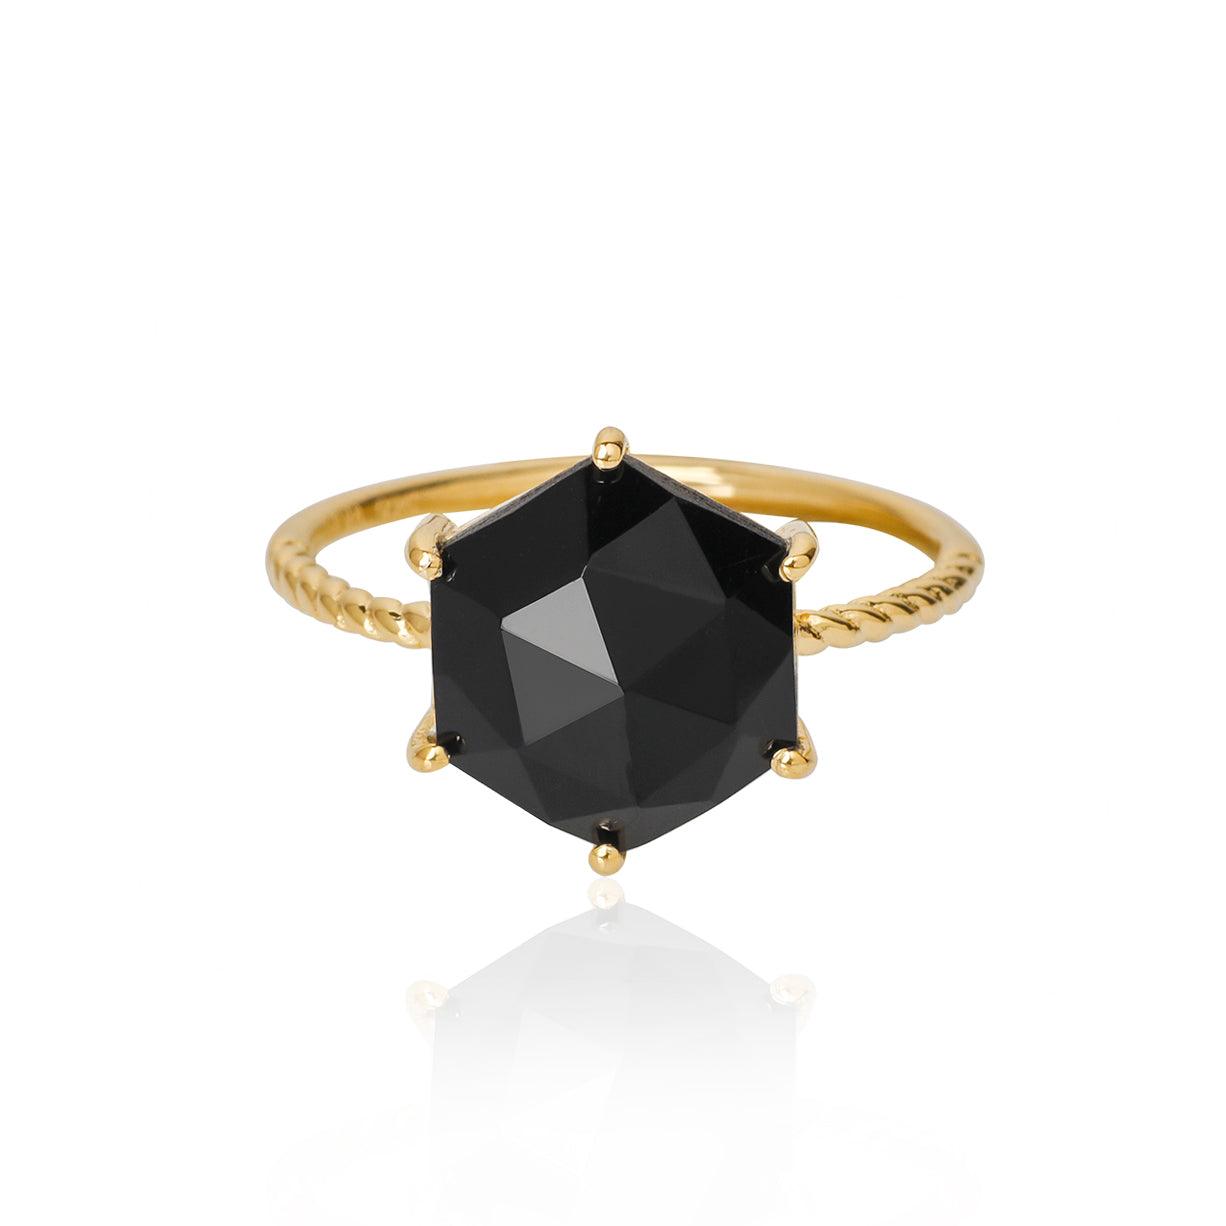 Black Onyx Solitaire Ring 14k Gold Over 925 Silver Jewelry - YoTreasure